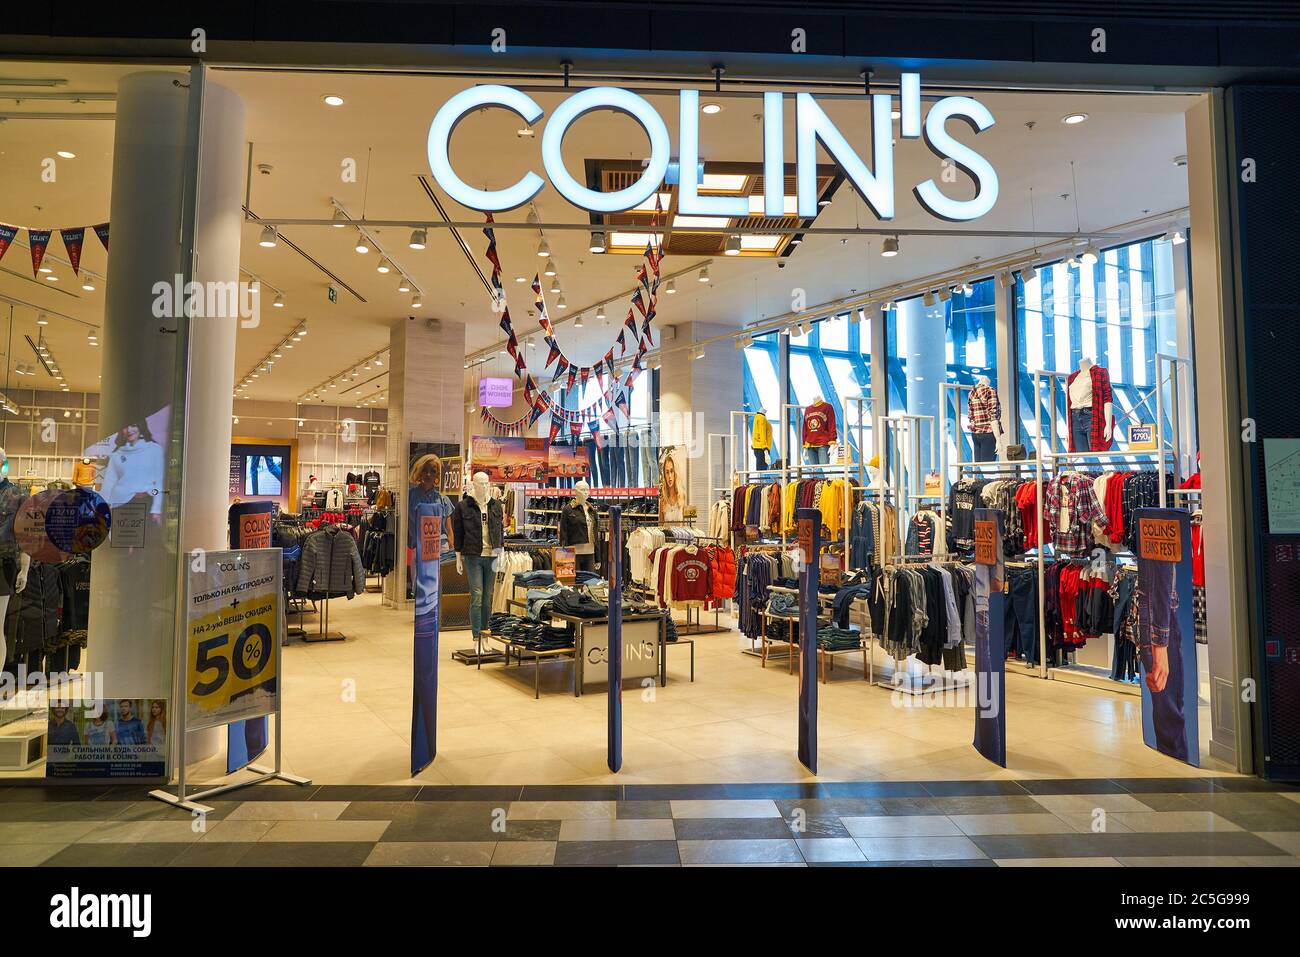 MOSCOW, RUSSIA - SEPTEMBER 14, 2019: entrance to Colin's store at Salaris shopping mall in Moscow. Stock Photo